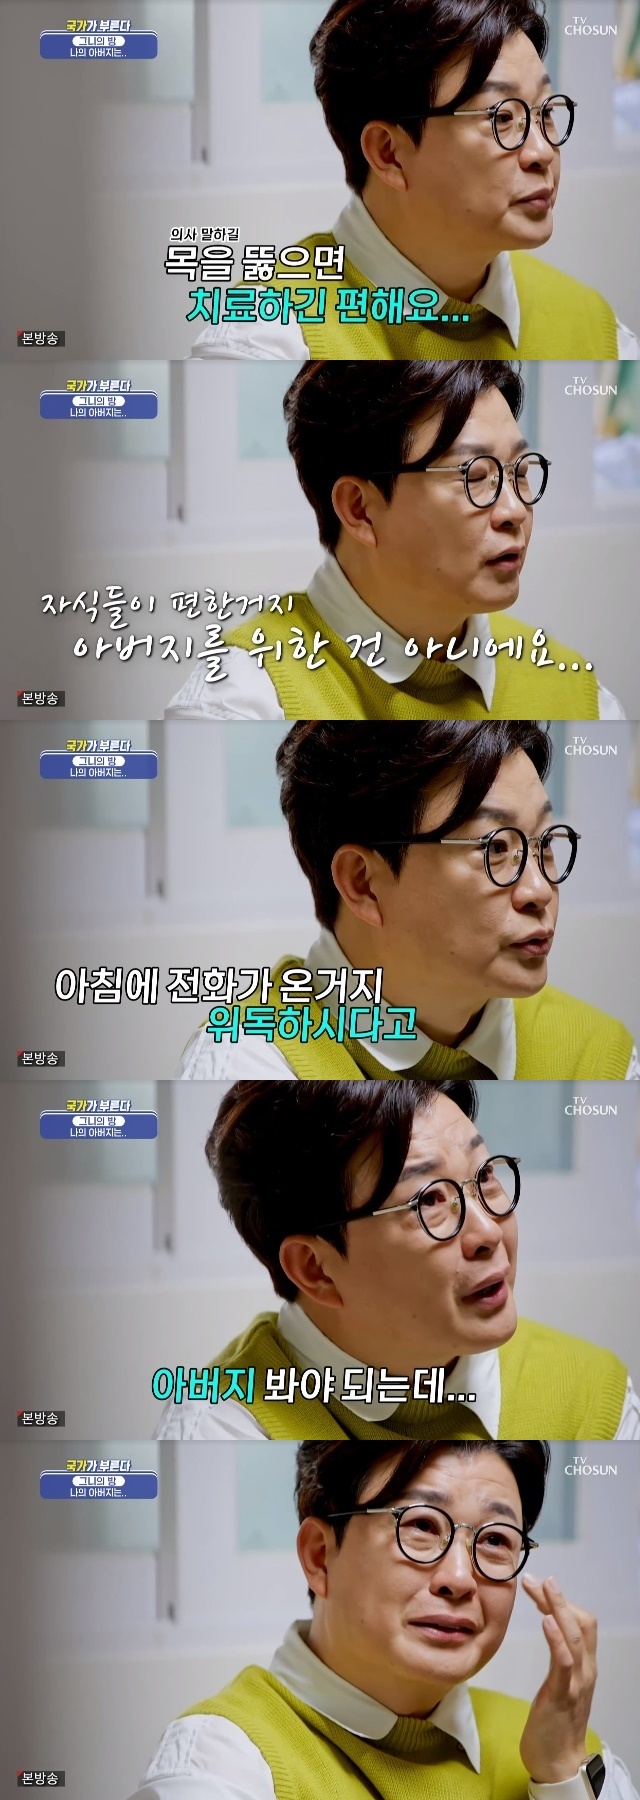 Kim Seong-joo has revealed his limit for failing to keep his fathers deathbed.In the 9th episode of the TV Chosun entertainment Secret Agent Miss Oh (hereinafter referred to as Nationality Department) broadcast on April 14, Kim Seong-joo had time to be friends with the same age chang-geun park.On this day, Kim Seong-joo asked, I am crying when I sing while I am contesting? Did you see? It is menopause.There are so many tears, he said.Kim Seong-joo said, I do not really cry other things, but it is too hard to talk about my parents. My fathers were patriarchal in our time.So were forced to lean on my mom a lot.I should not live like a father when I grow up, I should be caring for the children. I think so much. Kim Seong-joo said: My father has a good reputation outside but when he came home he was strong; I was the third reader, so he made my son harder: You have to be strong.I was trying to provoke you... ...and you were trying to make me live in the world. Then she said, Why?I did, but after a long time, my father went down to my hometown and followed me.What I should have done early. Parkinsons disease is going on, and its all hardening around the spine. No food, no talking.If your neck is stiff, your doctor says its easy to treat. You can keep living. But its not for the patient.So I was thinking too much. I always thought my father would be strong. Hed take care of it without anyone helping him.But I saw a weak figure, he said.Kim Seong-joo said, And the day before he died, I went to see my father. I wanted to take my children with me.They bought snacks and Ice cream because they knew nothing, and then they ate them and brought them to their grandfathers faces.My father blinked. He said, Youre fine. I came home with a caregiver, and the phone called in the morning.It was critical, it was 8 a.m., he recalled.Its time to go. Youre in critical condition. I regret sleeping at the hospital. I just arrived.The Republic of Korea touched him, and he was surprised. It was cold. He thought it was cold because of the ice cream he gave him yesterday.They say his sons name. He says Kim Seong-joo. The Republic of Korea jumped in. He wants me to write something. I write names.The dog wrote, Do not be cold for my grandfather.Kim Seong-joo then sang to Chang-geun park with a locked voice, asking him to love him where his father liked it.